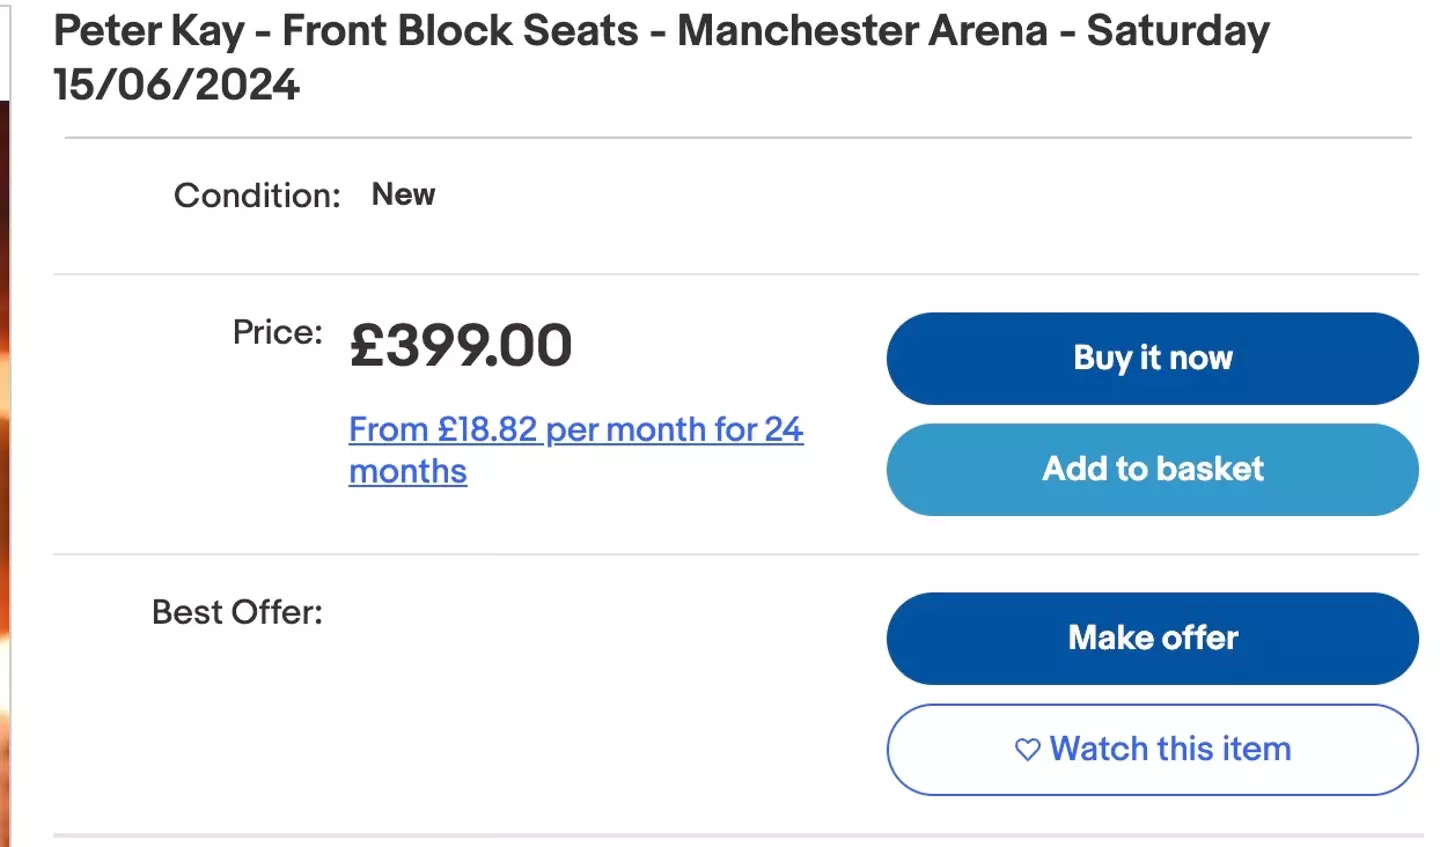 Touts are looking to make some money out of the insane demand for tickets.